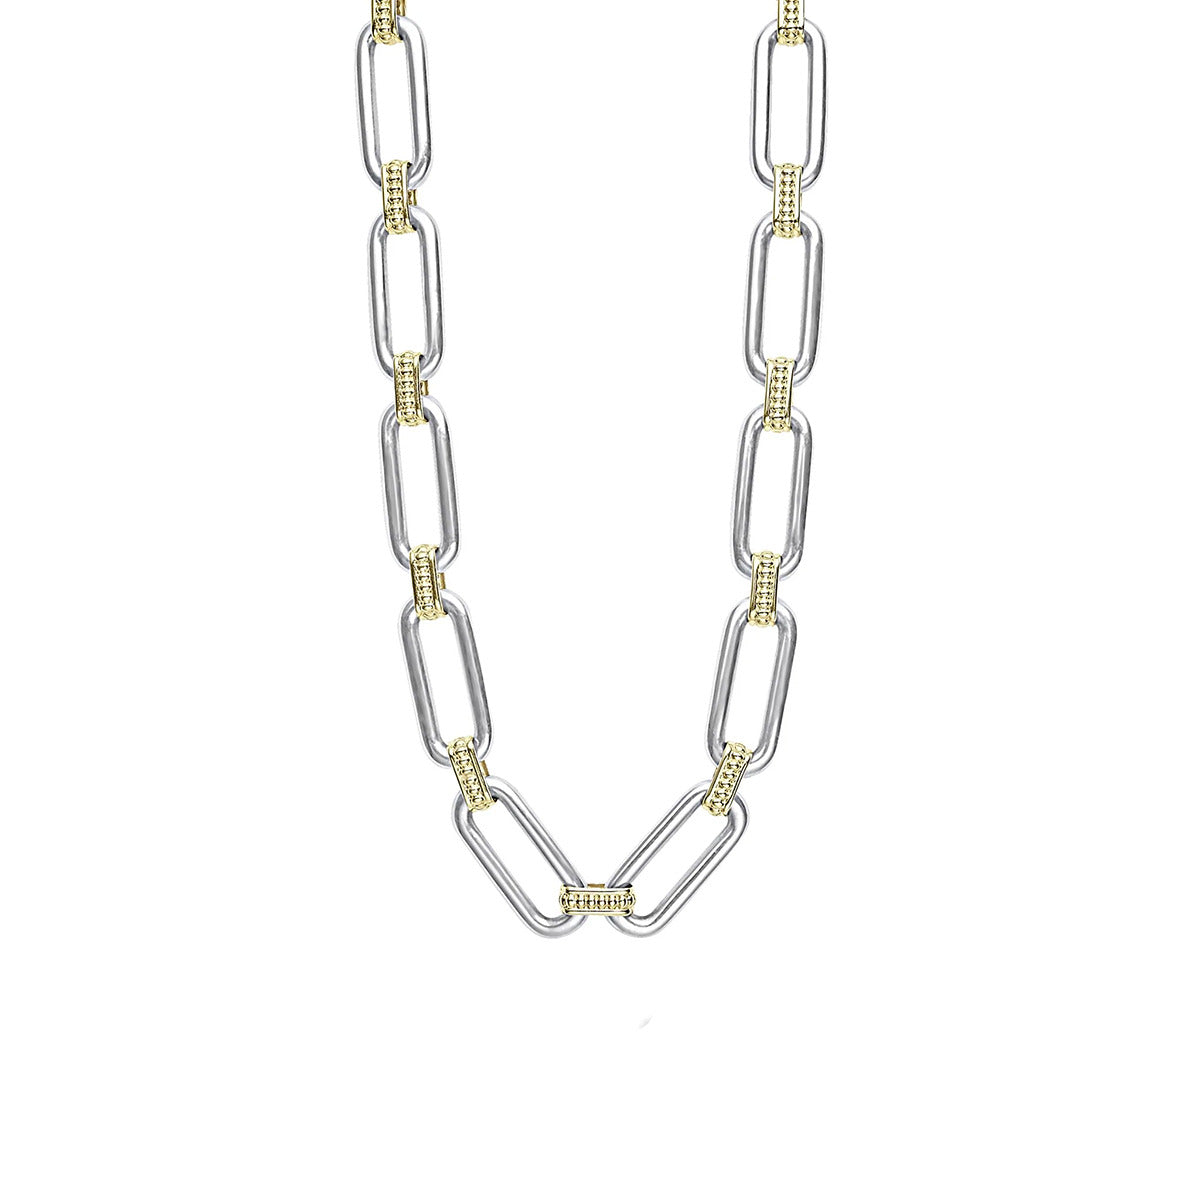 Two-Tone Iced Ball Chain, Size 18, 14K White - The GLD Shop